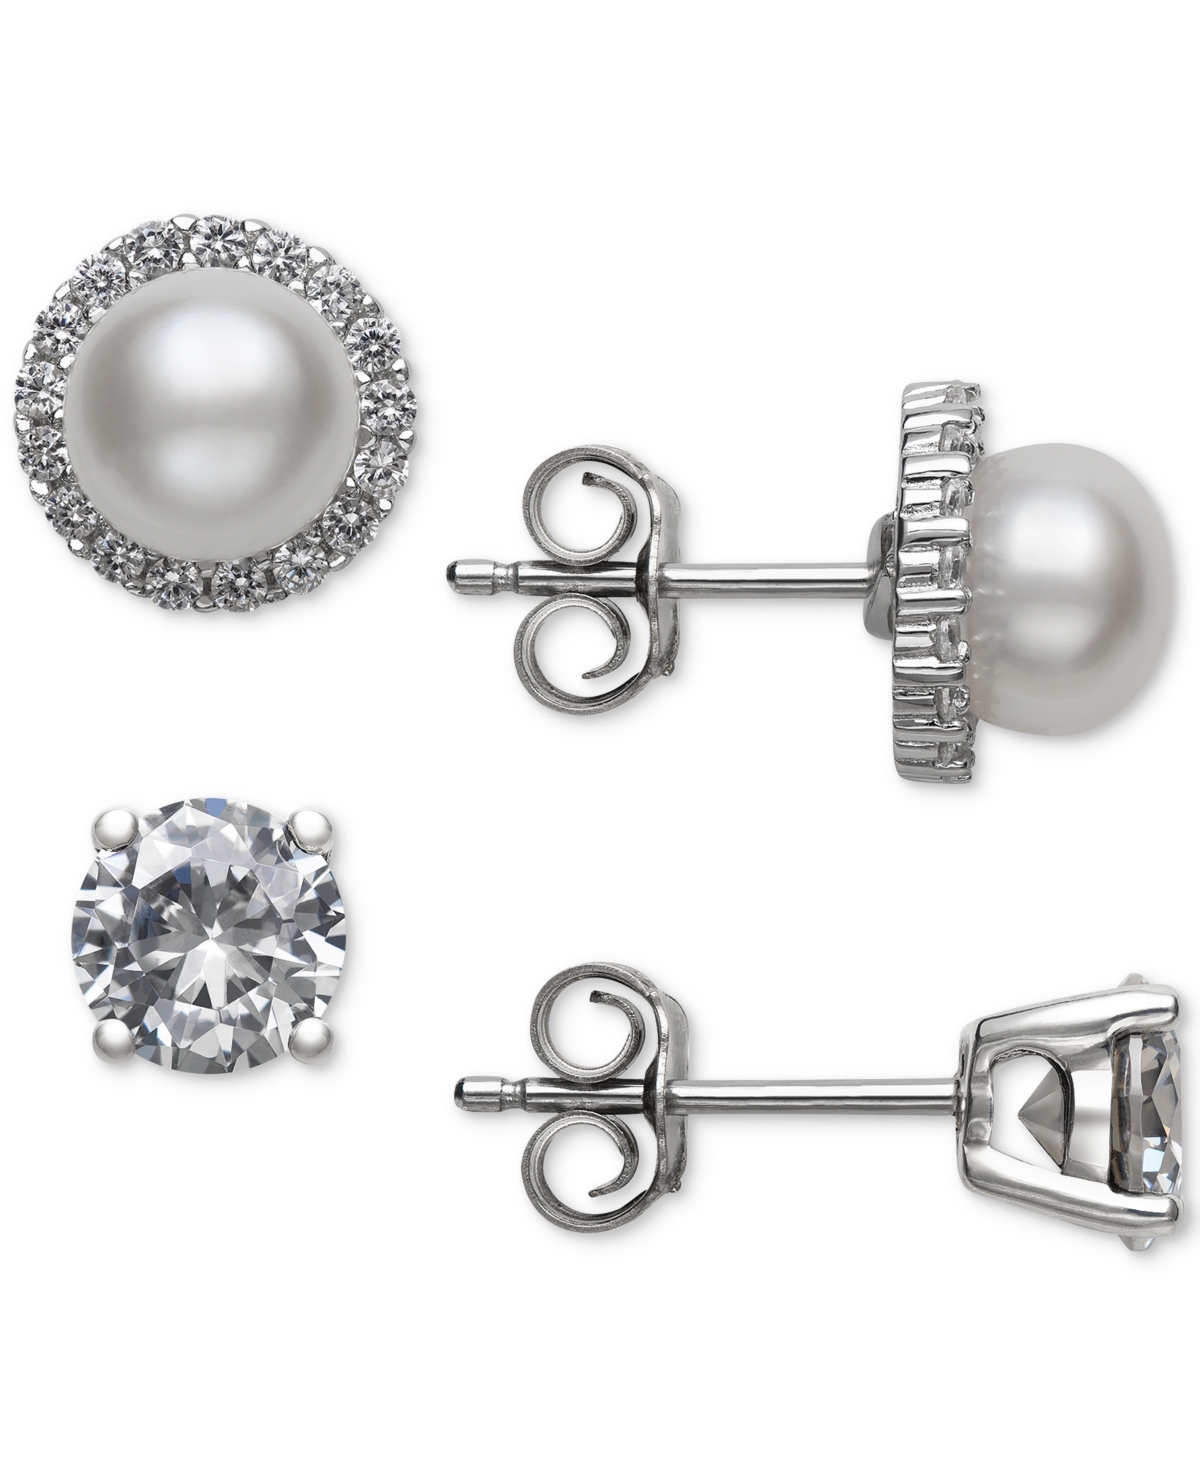 2-Pc. Set Cultured Freshwater Pearl (6mm) & Cubic Zirconia Stud Earrings in Sterling Silver, Created for Macy's - Silver